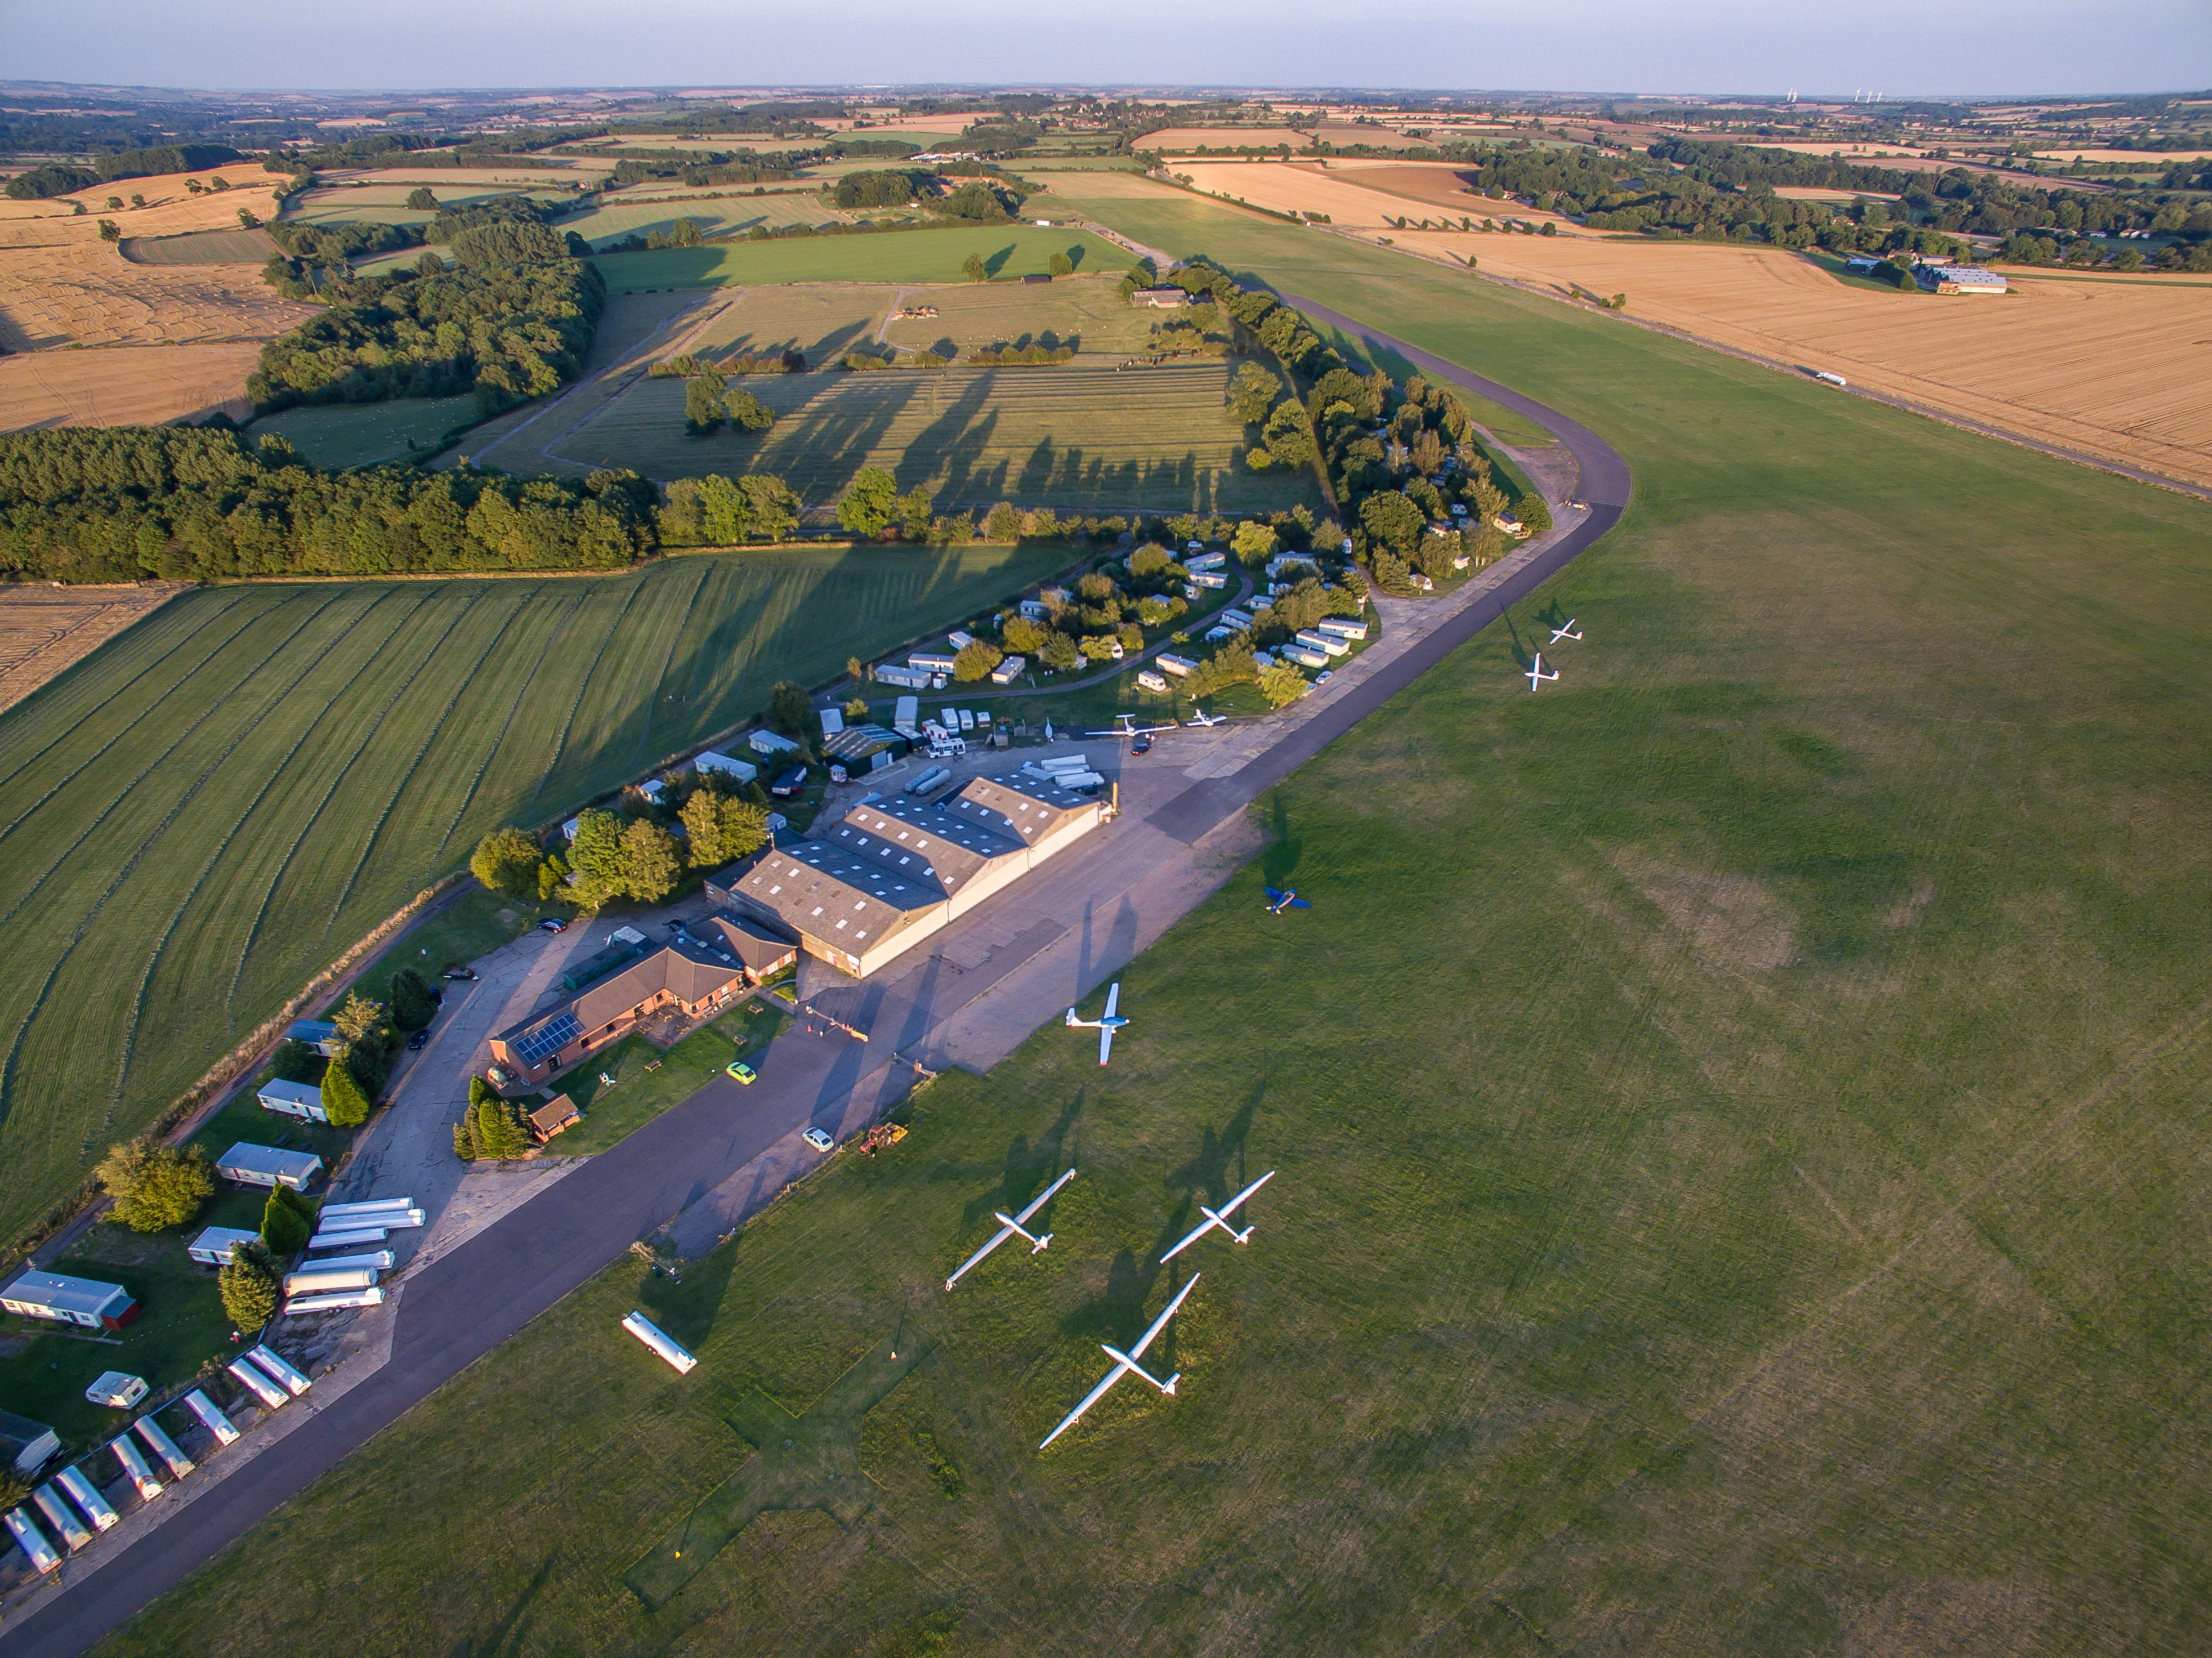  The Gliding Centre at Husbands Bosworth which will host the Women’s World Championships in 2021. (Photo: www.peteralvey.com)